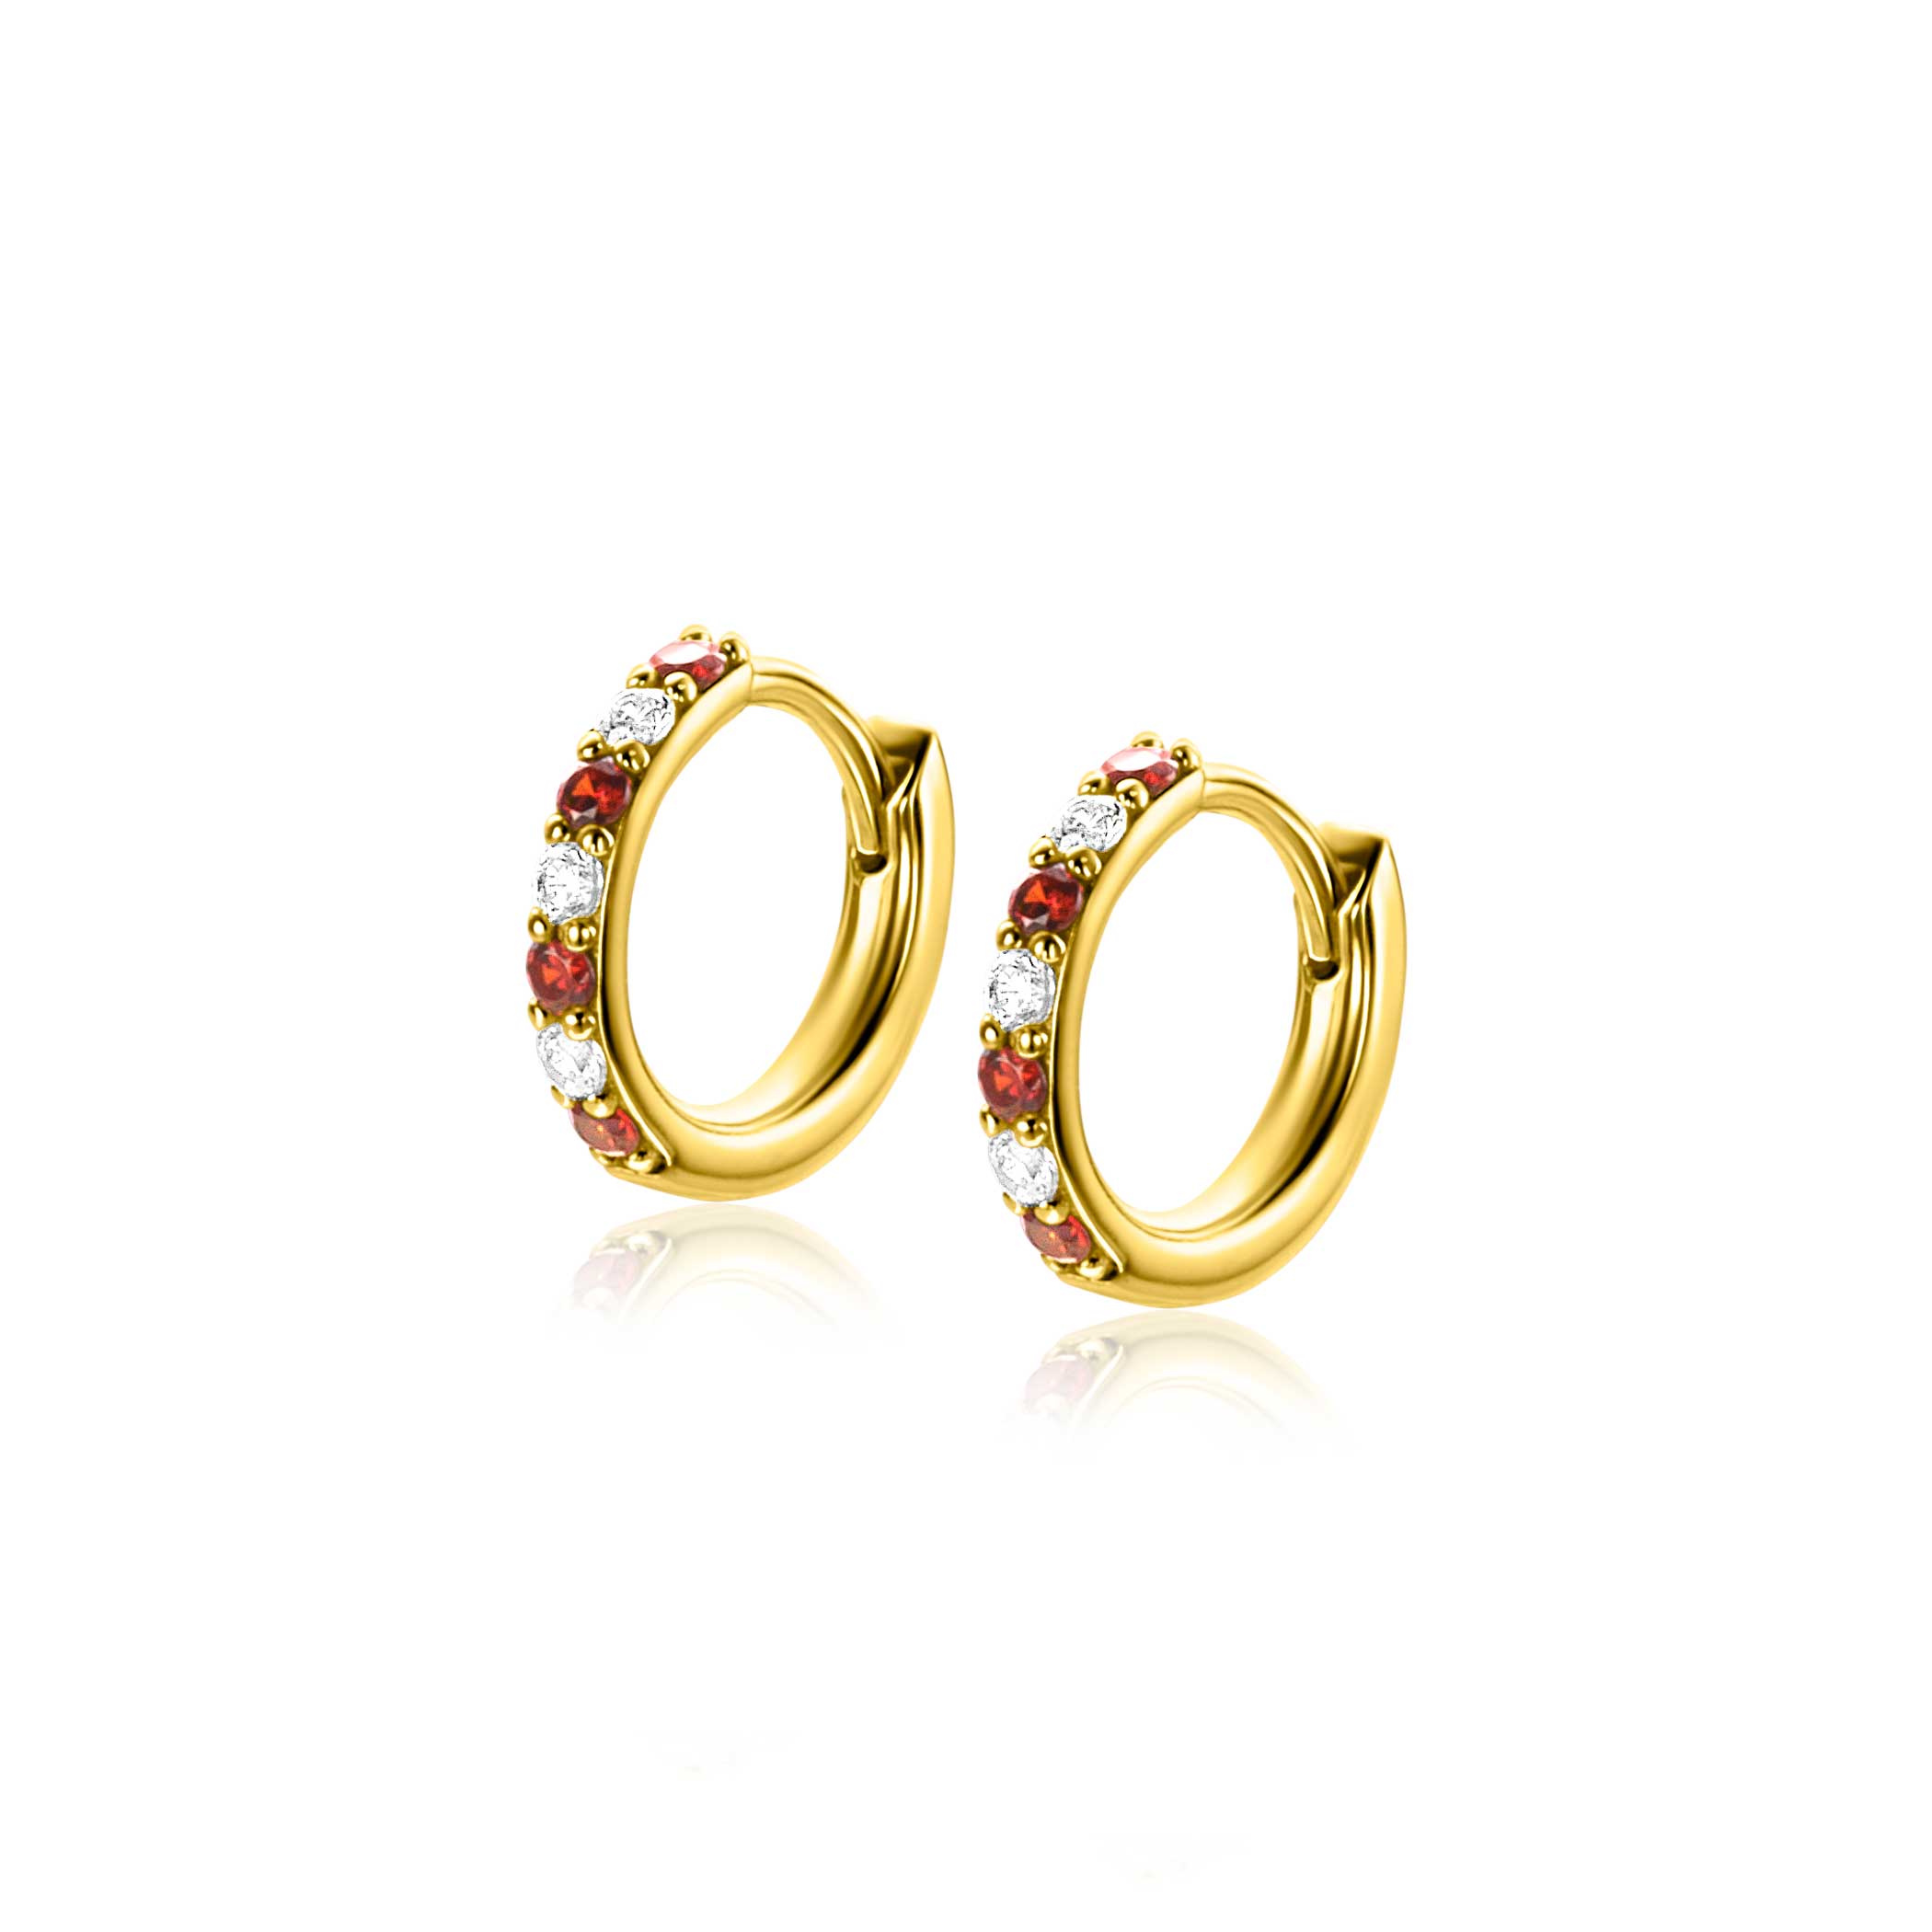 12mm ZINZI Gold Plated Sterling Silver Hoop Earrings Round White Zirconias and Red Garnet Color Stones 2mm width tube ZIO2558